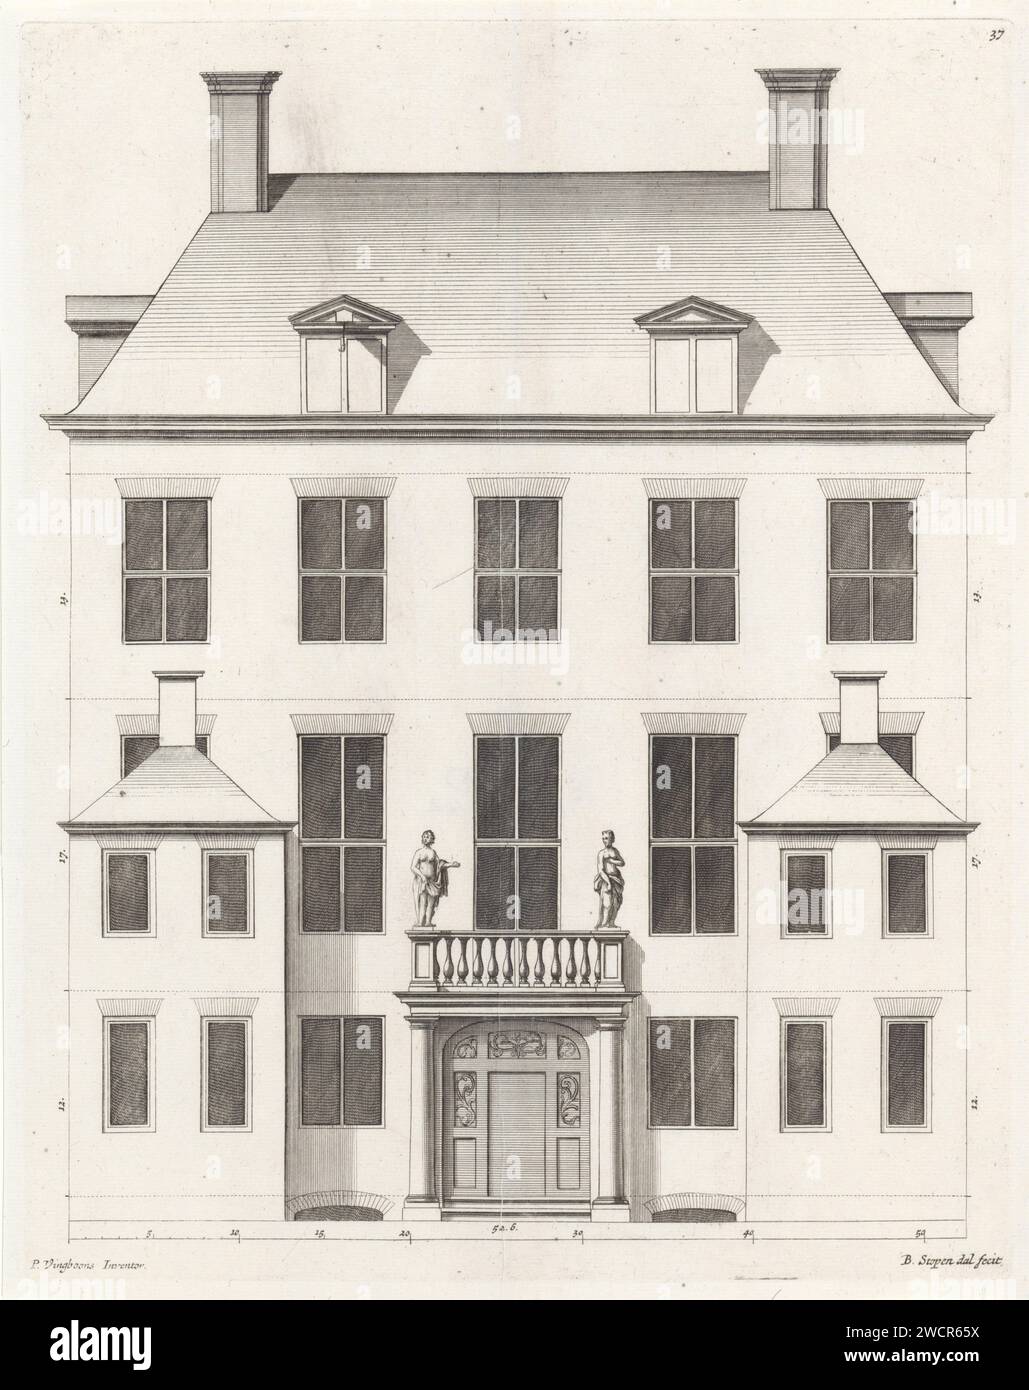 Rear facade of a house on Keizersgracht in Amsterdam, Bastiaen Stopendael, after Philips Vinckboons (II), 1674 print Rear facade of a house on Keizersgracht in Amsterdam, built on behalf of Isaak Jan Nijs in 1664-1666. The house was designed by Philips Vingboons. Amsterdam paper etching / engraving exterior  architectural design or model Stock Photo